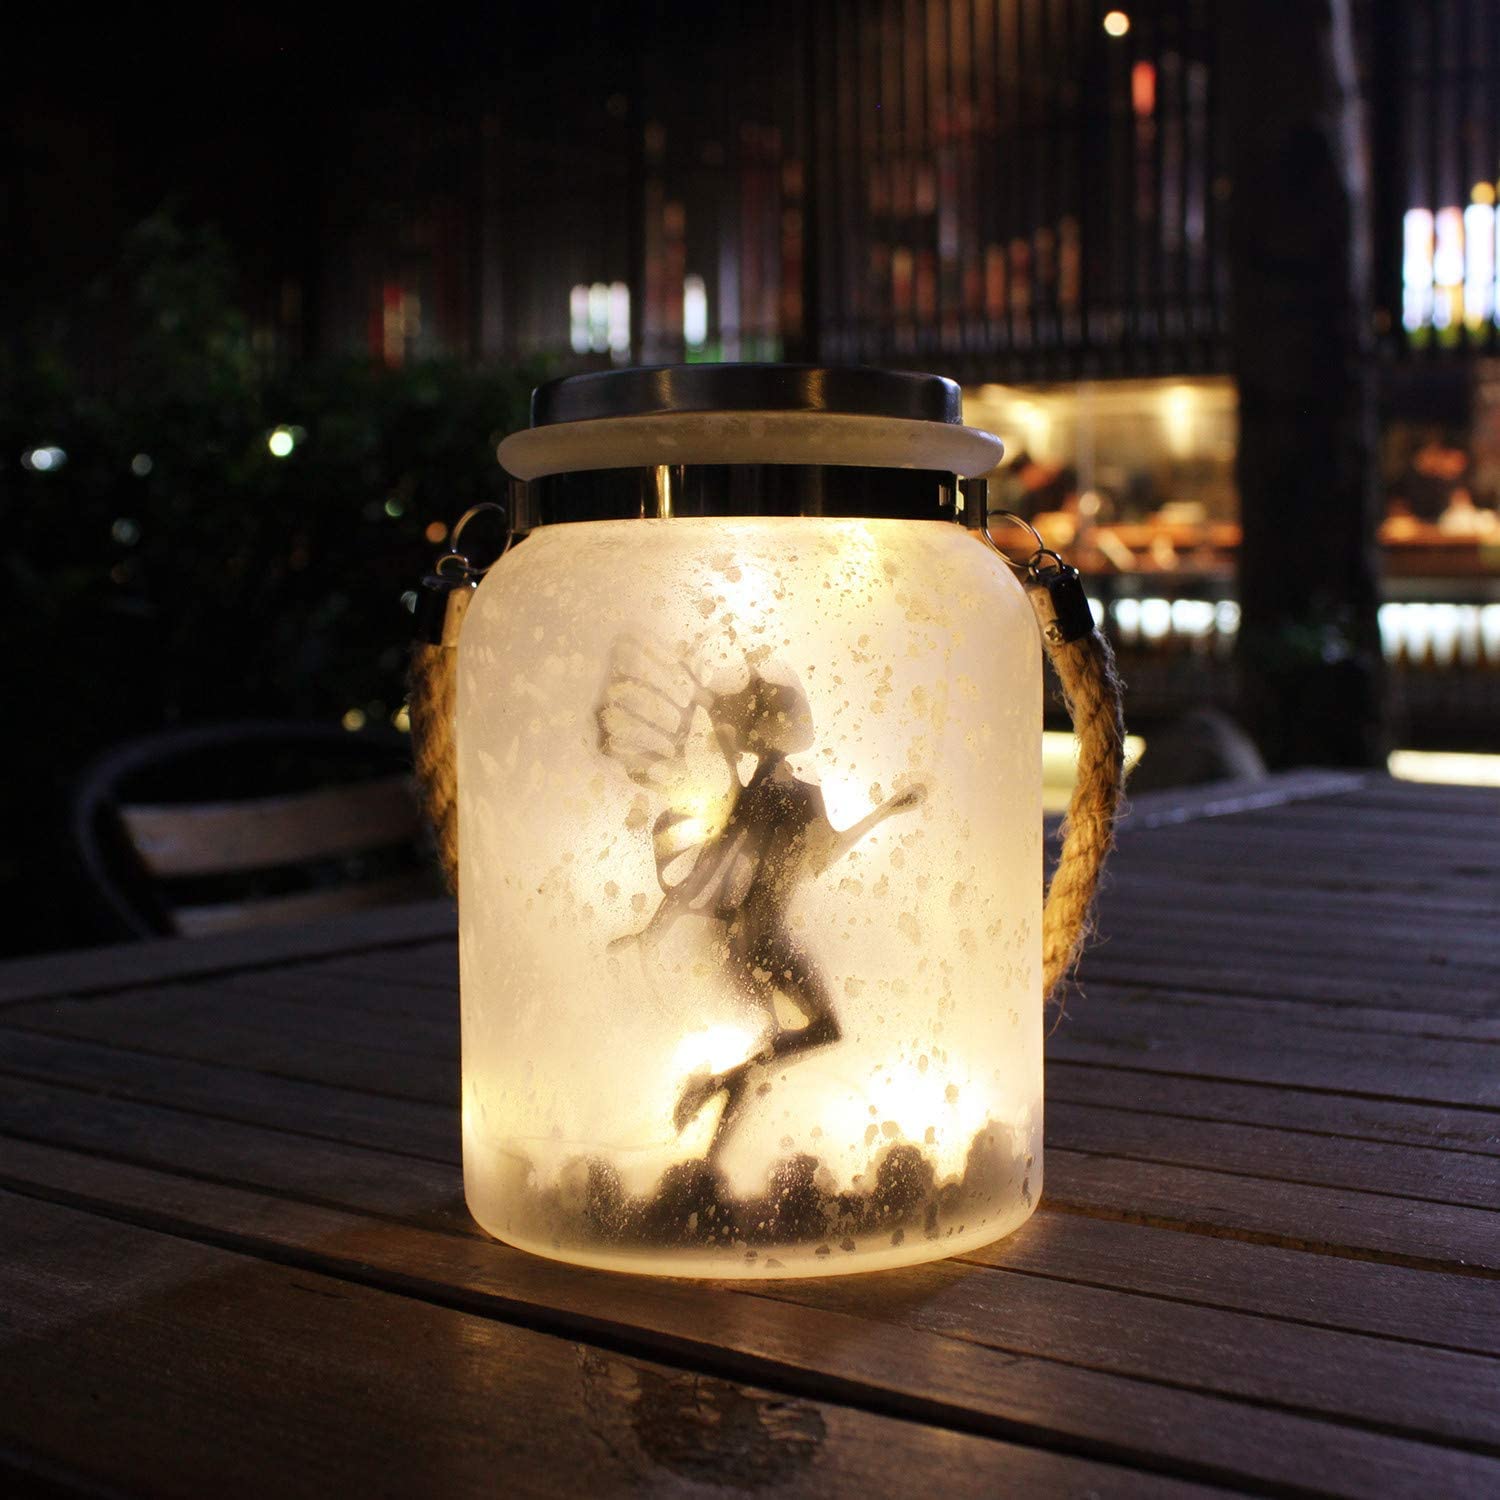 Kaixoxin Solar Lantern Fairy Lights Ideal for Great Gifts White Frosted Glass Hanging Jar Solar Lights Outdoor Decorative 20 Warm White Mini LED String Lights (Fairy) (1)
